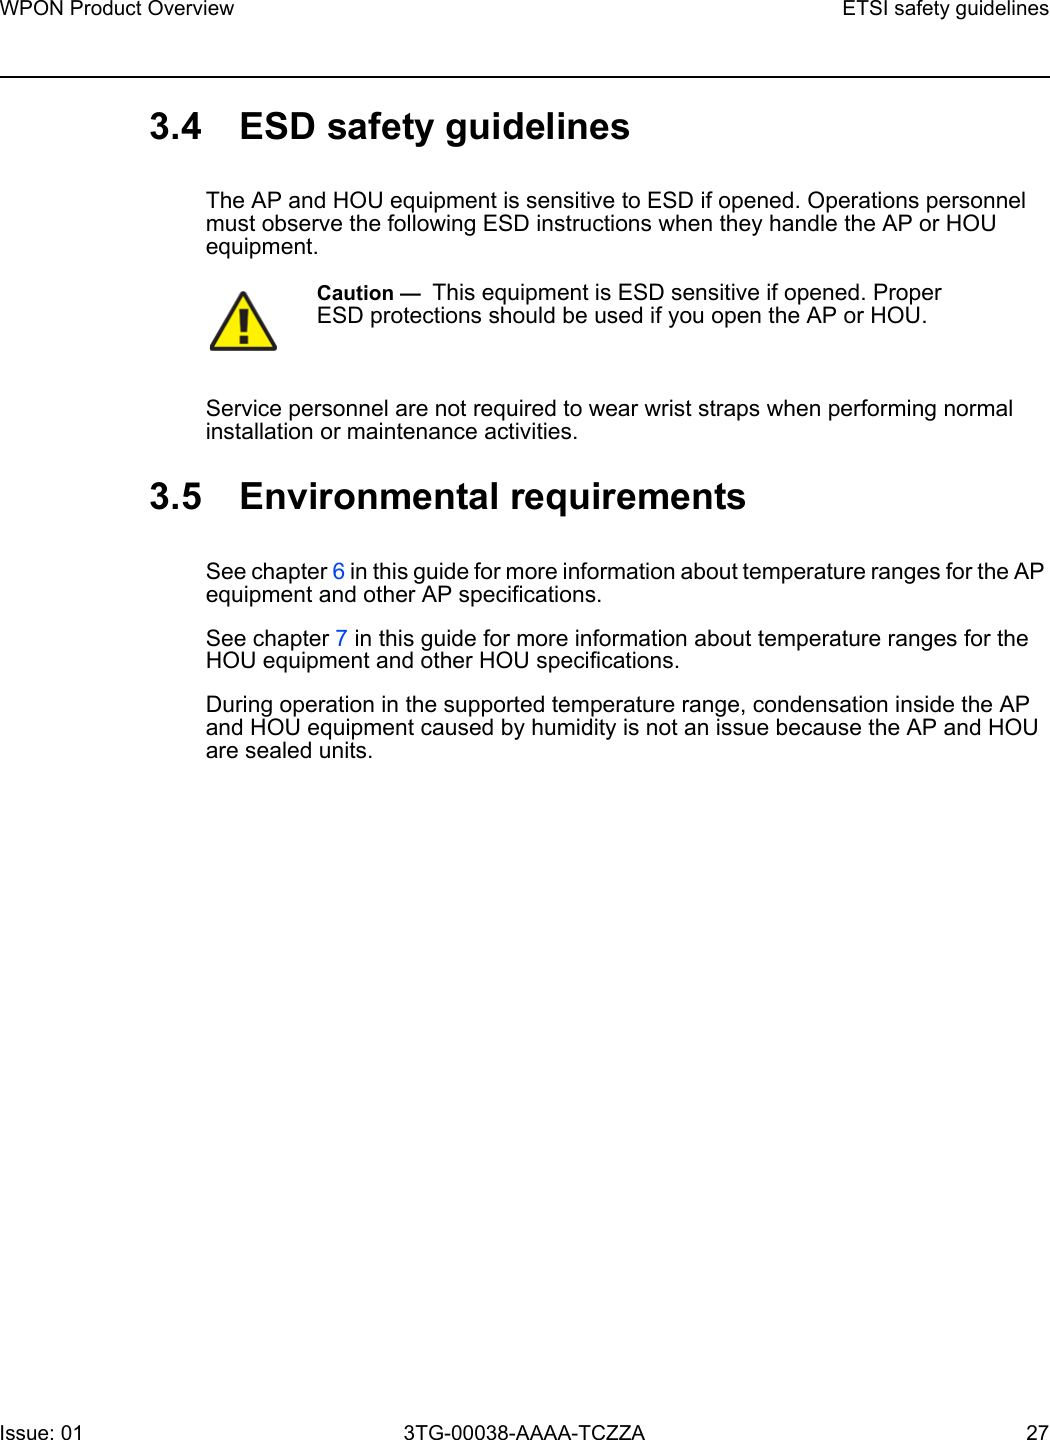 WPON Product Overview ETSI safety guidelinesIssue: 01 3TG-00038-AAAA-TCZZA 27 3.4 ESD safety guidelinesThe AP and HOU equipment is sensitive to ESD if opened. Operations personnel must observe the following ESD instructions when they handle the AP or HOU equipment. Service personnel are not required to wear wrist straps when performing normal installation or maintenance activities.3.5 Environmental requirementsSee chapter 6 in this guide for more information about temperature ranges for the AP equipment and other AP specifications. See chapter 7 in this guide for more information about temperature ranges for the HOU equipment and other HOU specifications. During operation in the supported temperature range, condensation inside the AP and HOU equipment caused by humidity is not an issue because the AP and HOU are sealed units.Caution —  This equipment is ESD sensitive if opened. Proper ESD protections should be used if you open the AP or HOU.